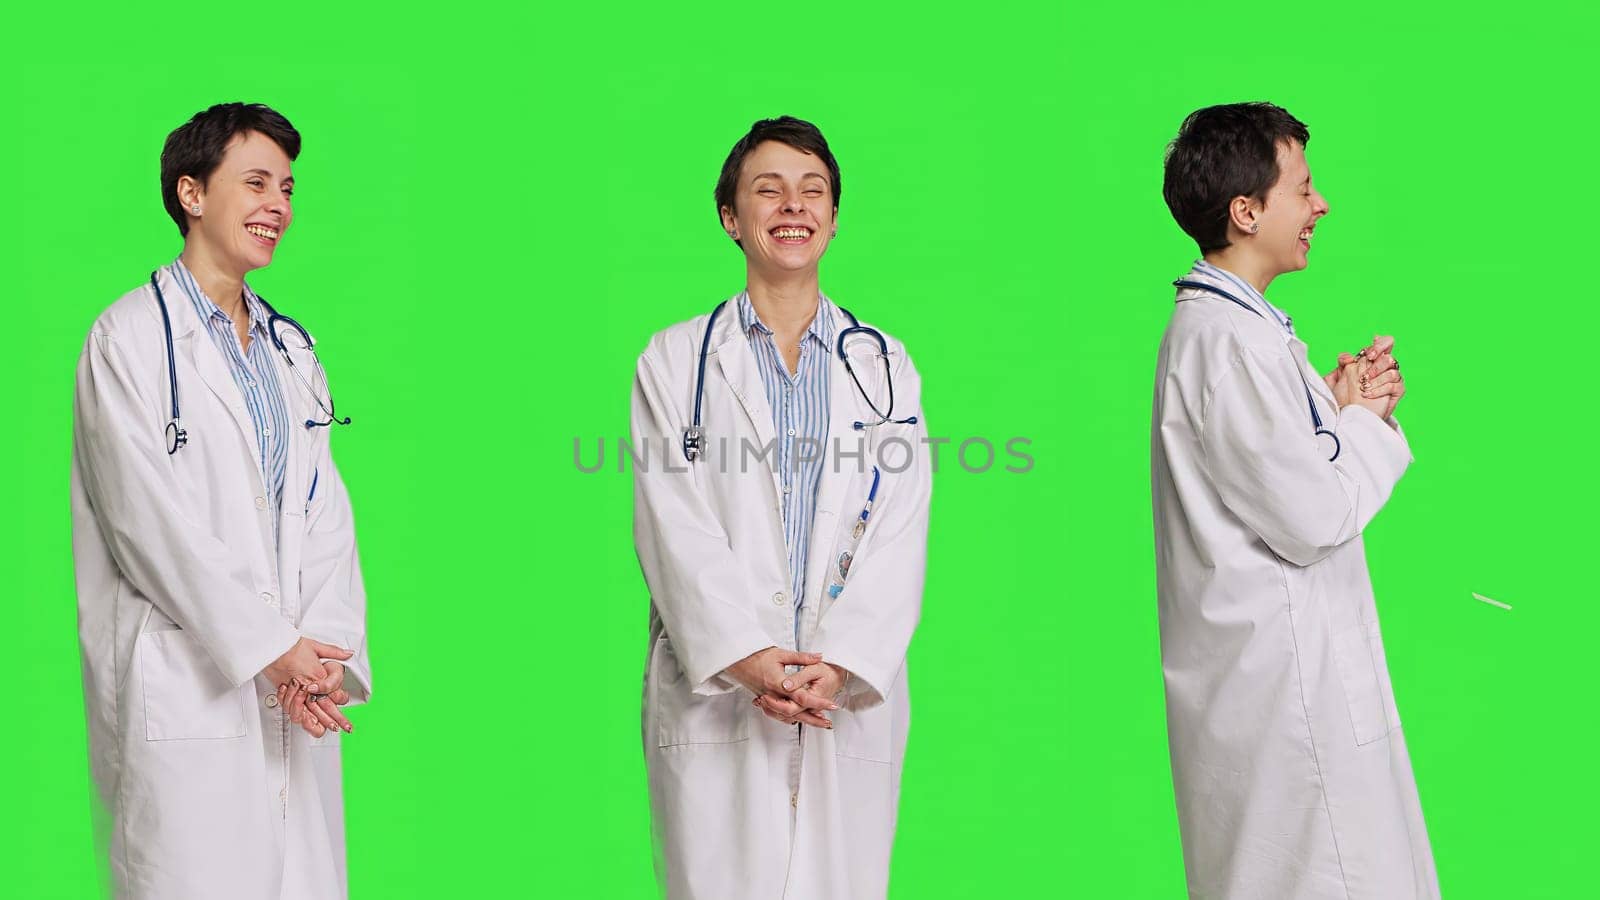 Portrait of general practitioner laughing at something against greenscreen by DCStudio